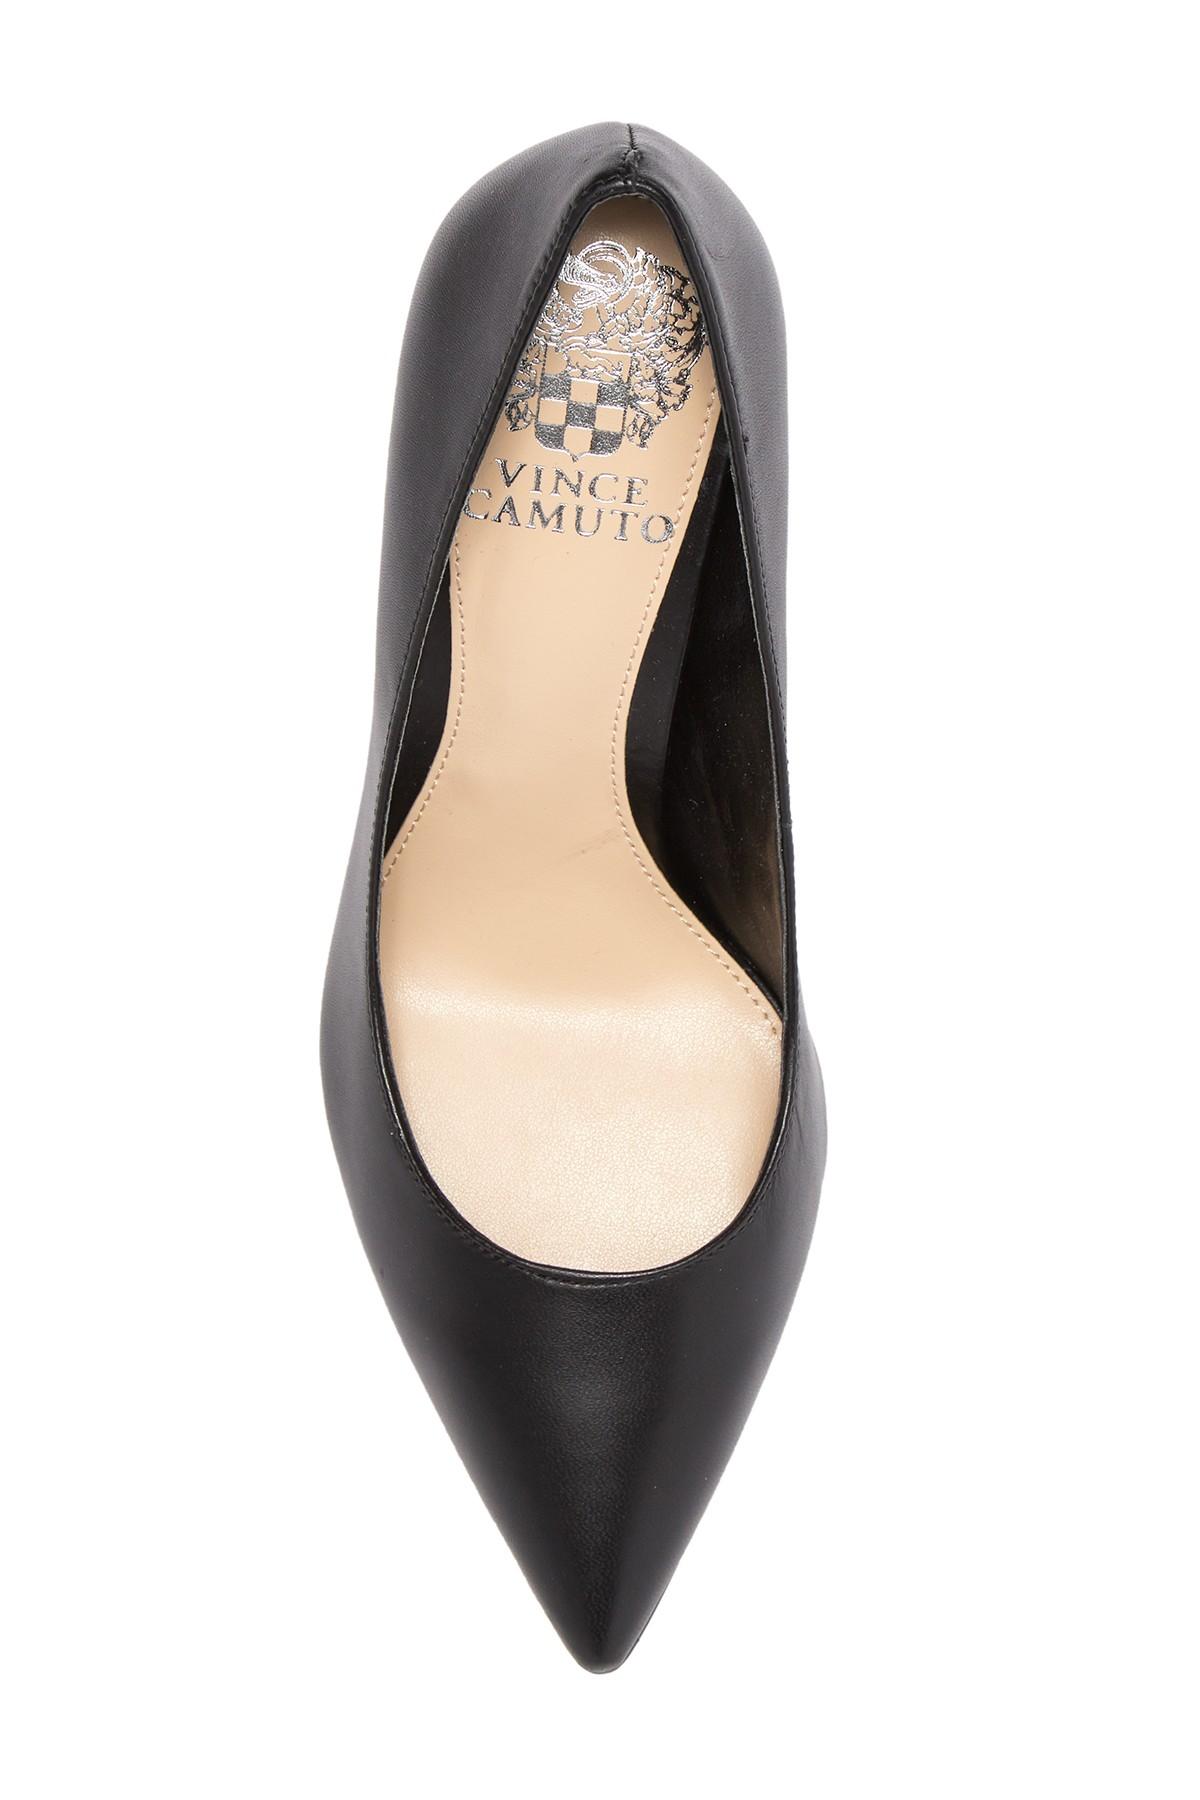 Vince Camuto Bellis Pointed Toe Pump in 